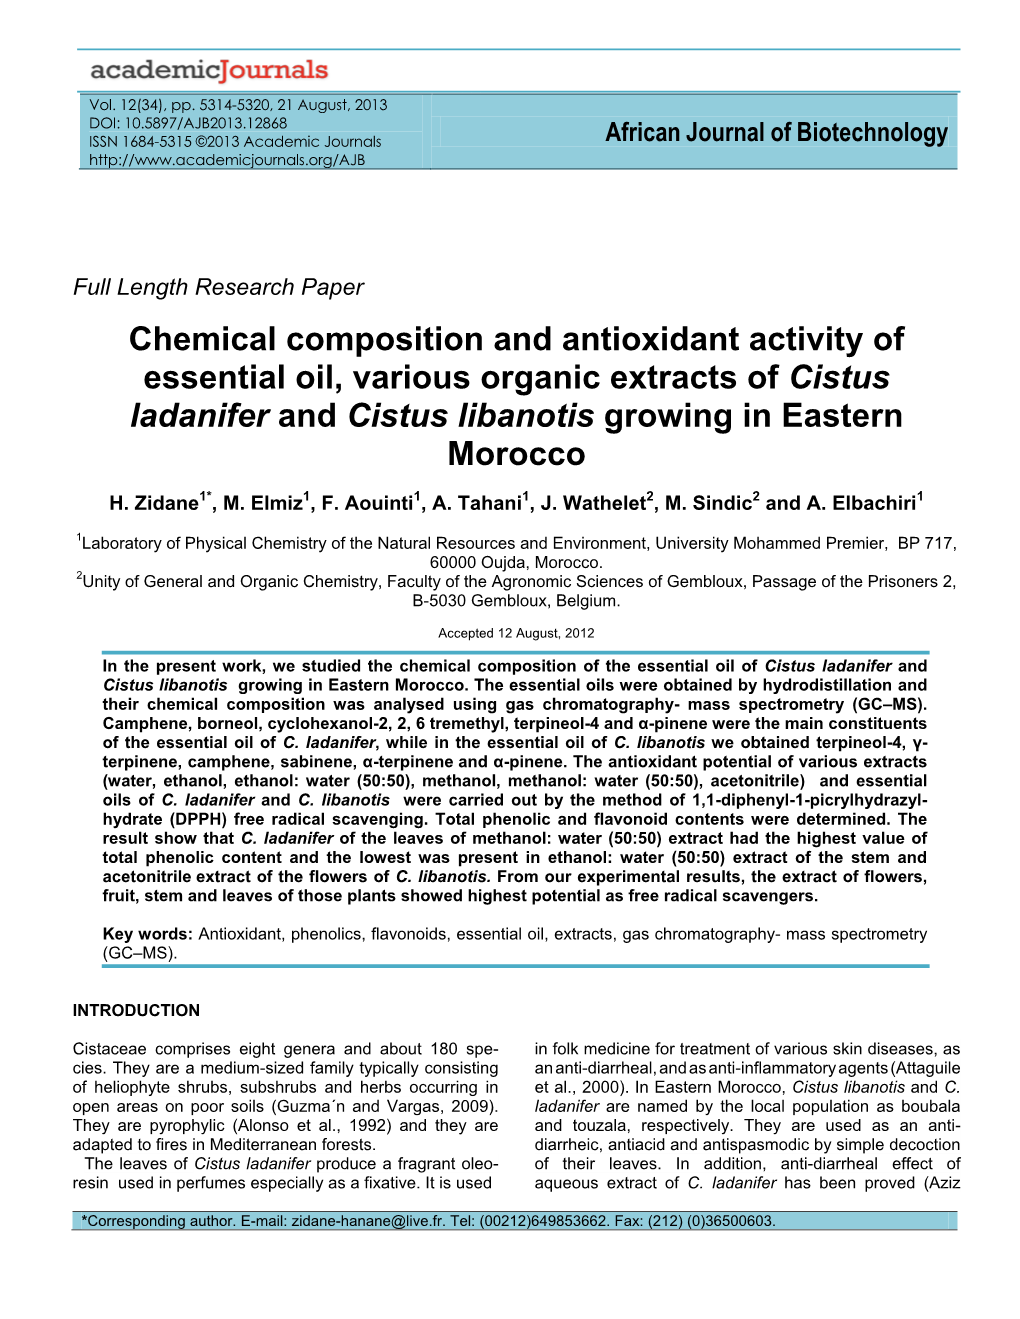 Chemical Composition and Antioxidant Activity of Essentiel Oil, Various Organic Extracts of Cistus Ladanifer and Cistus Libanoti